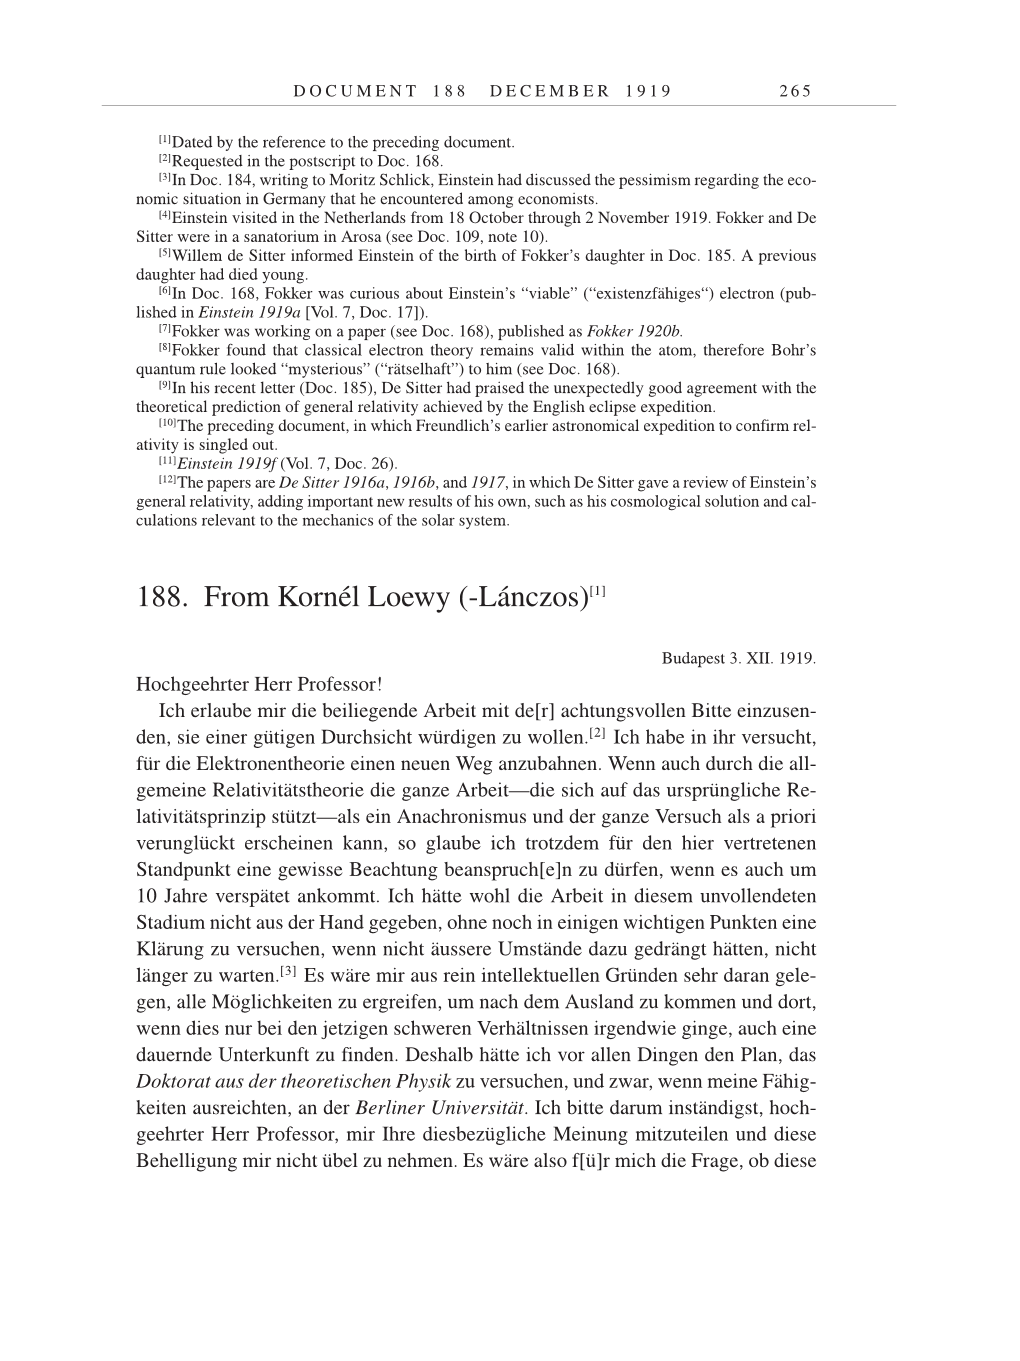 Volume 9: The Berlin Years: Correspondence January 1919-April 1920 page 265